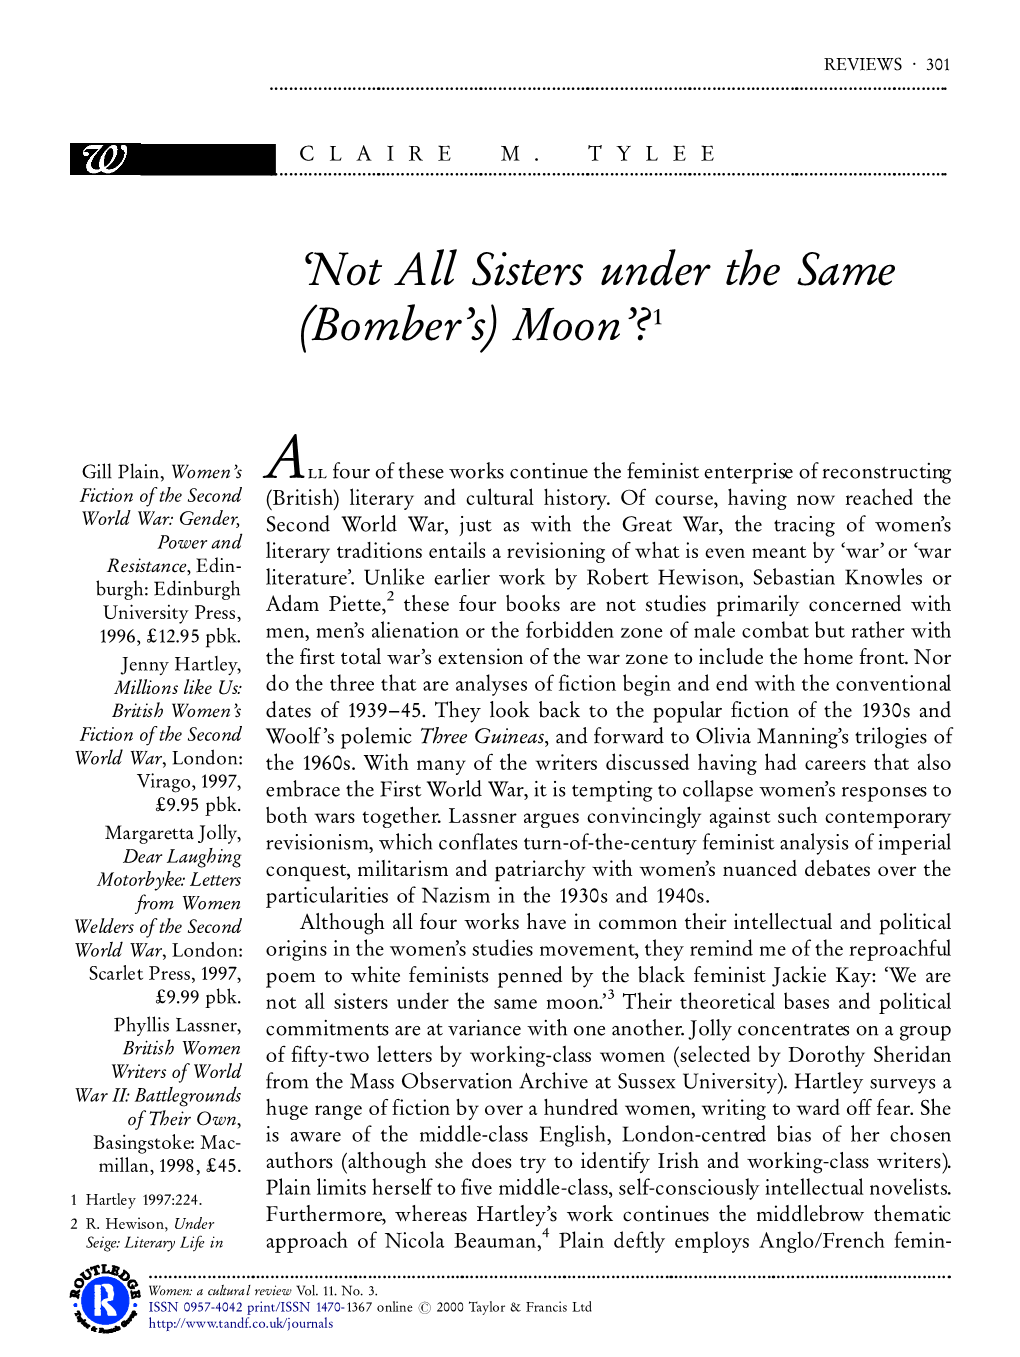 'Not All Sisters Under the Same (Bomber's) Moon'?